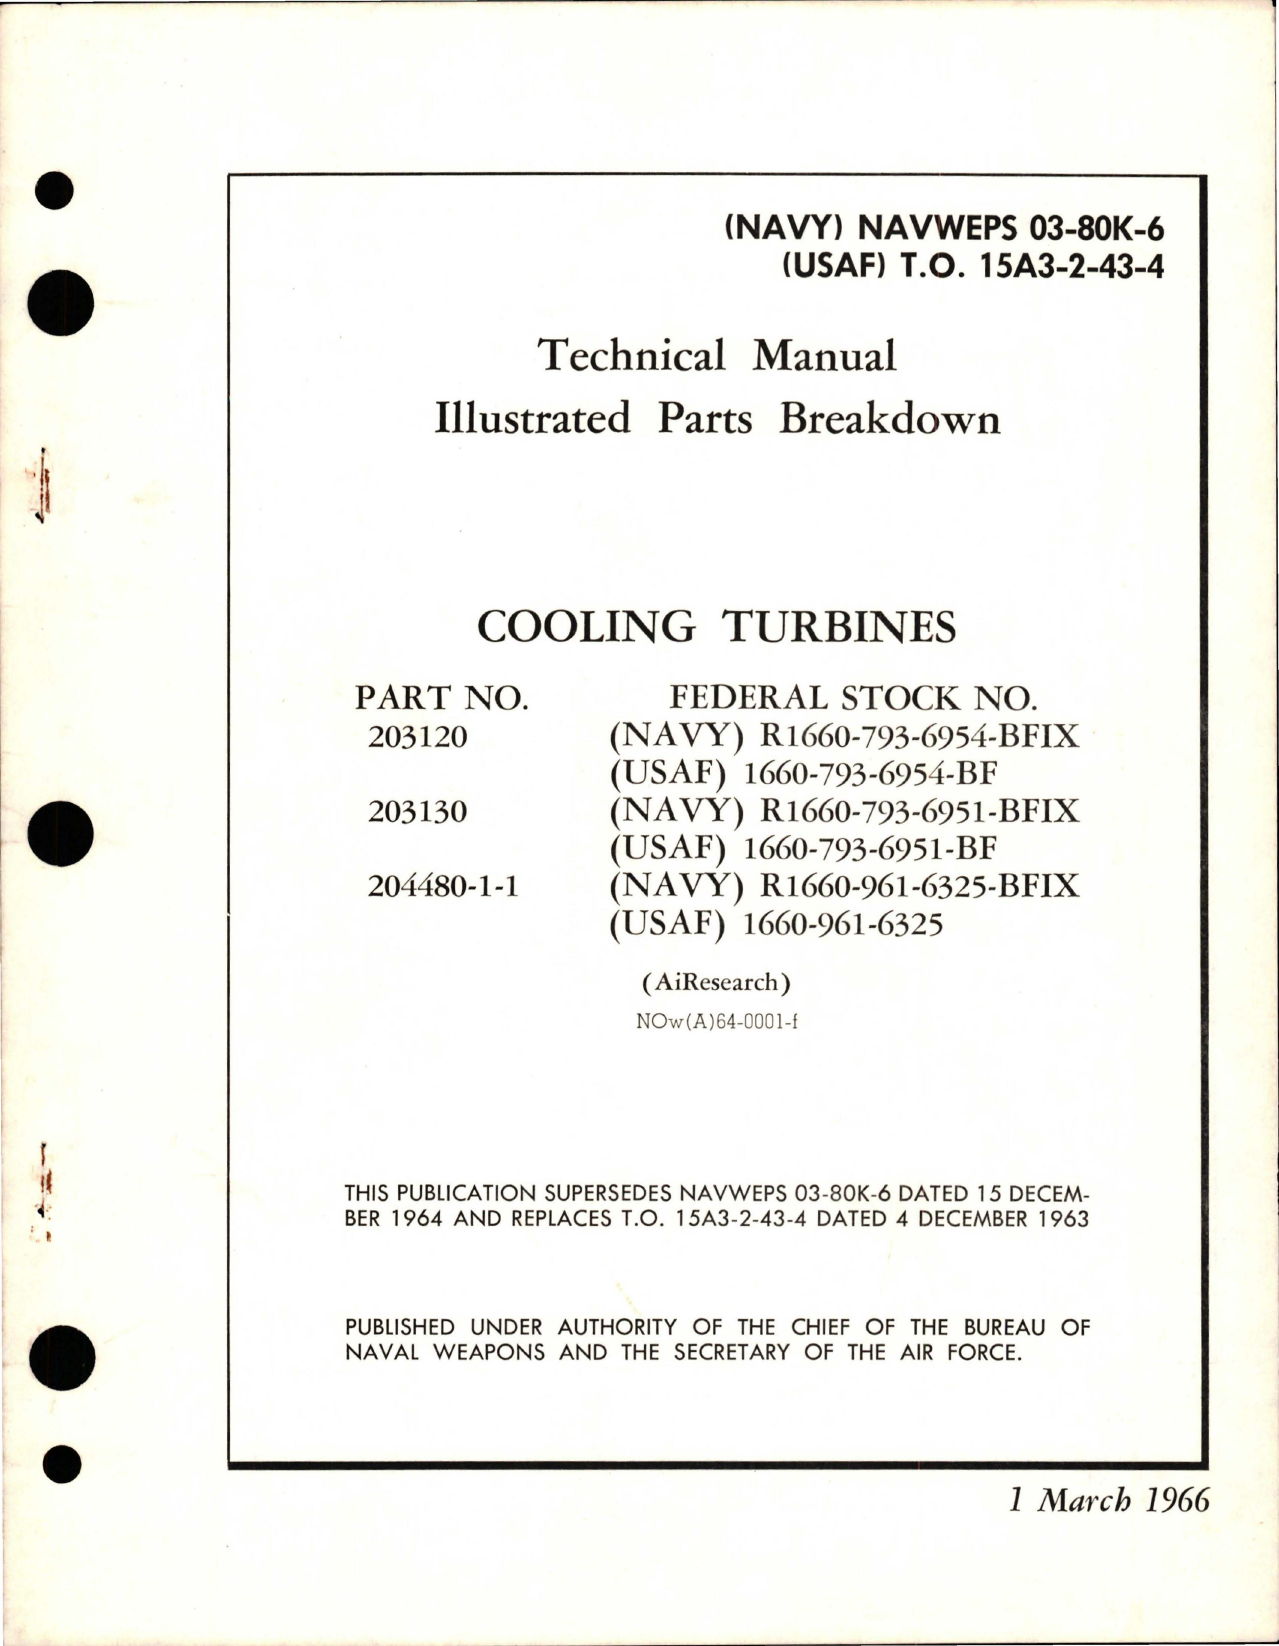 Sample page 1 from AirCorps Library document: Illustrated Parts Breakdown for Cooling Turbines - Parts 203120, 203130, and 204480-1-1